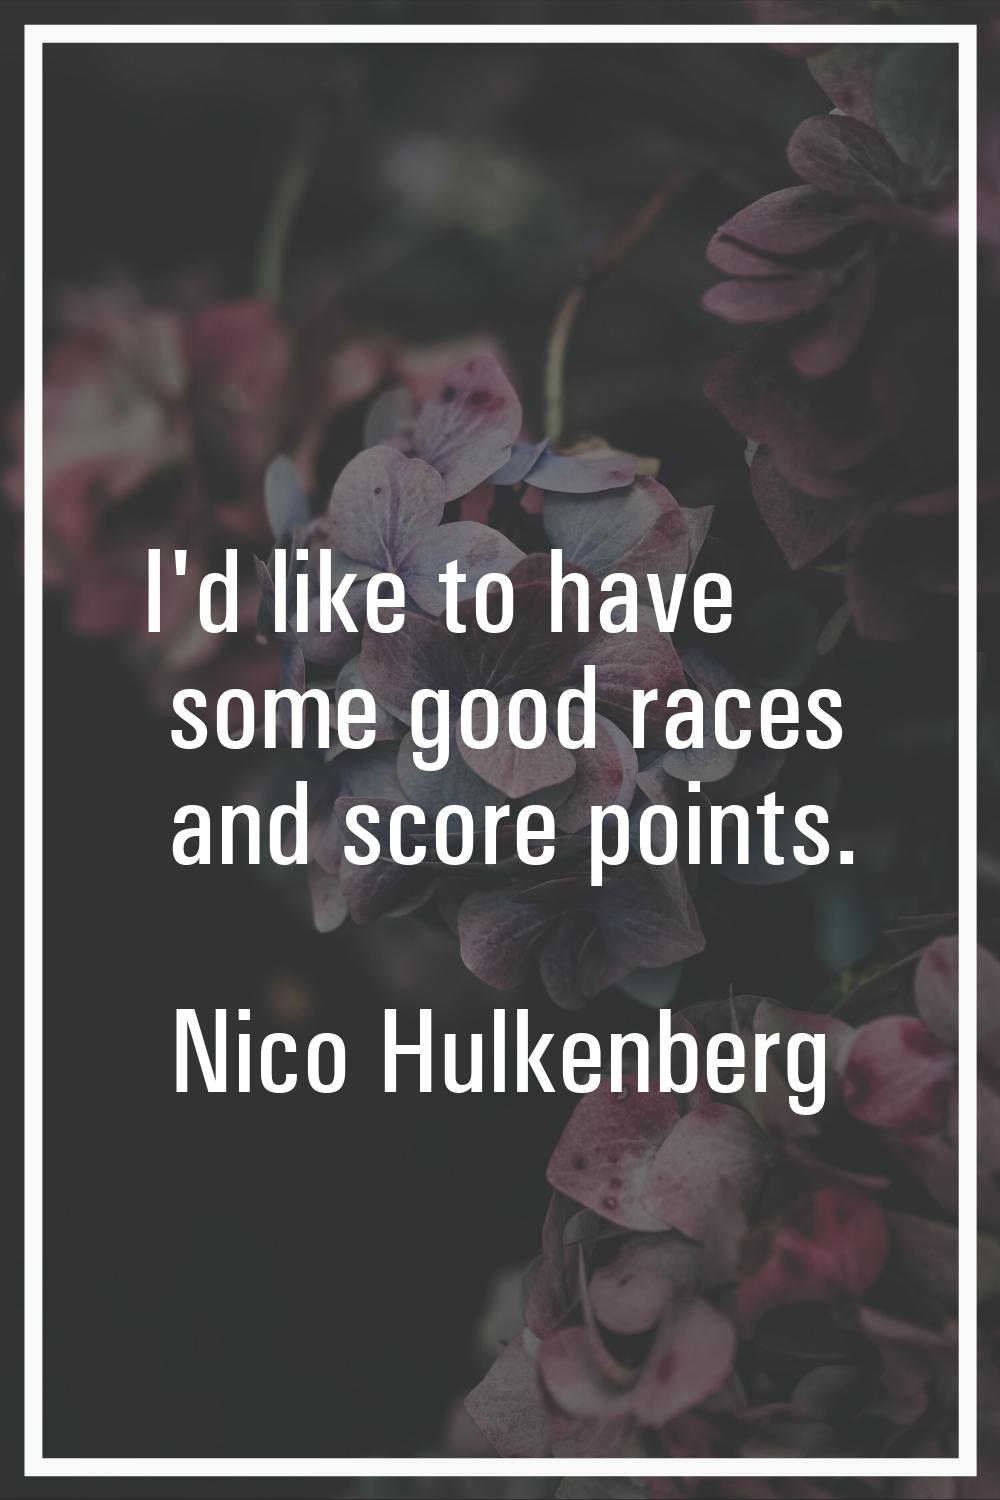 I'd like to have some good races and score points.